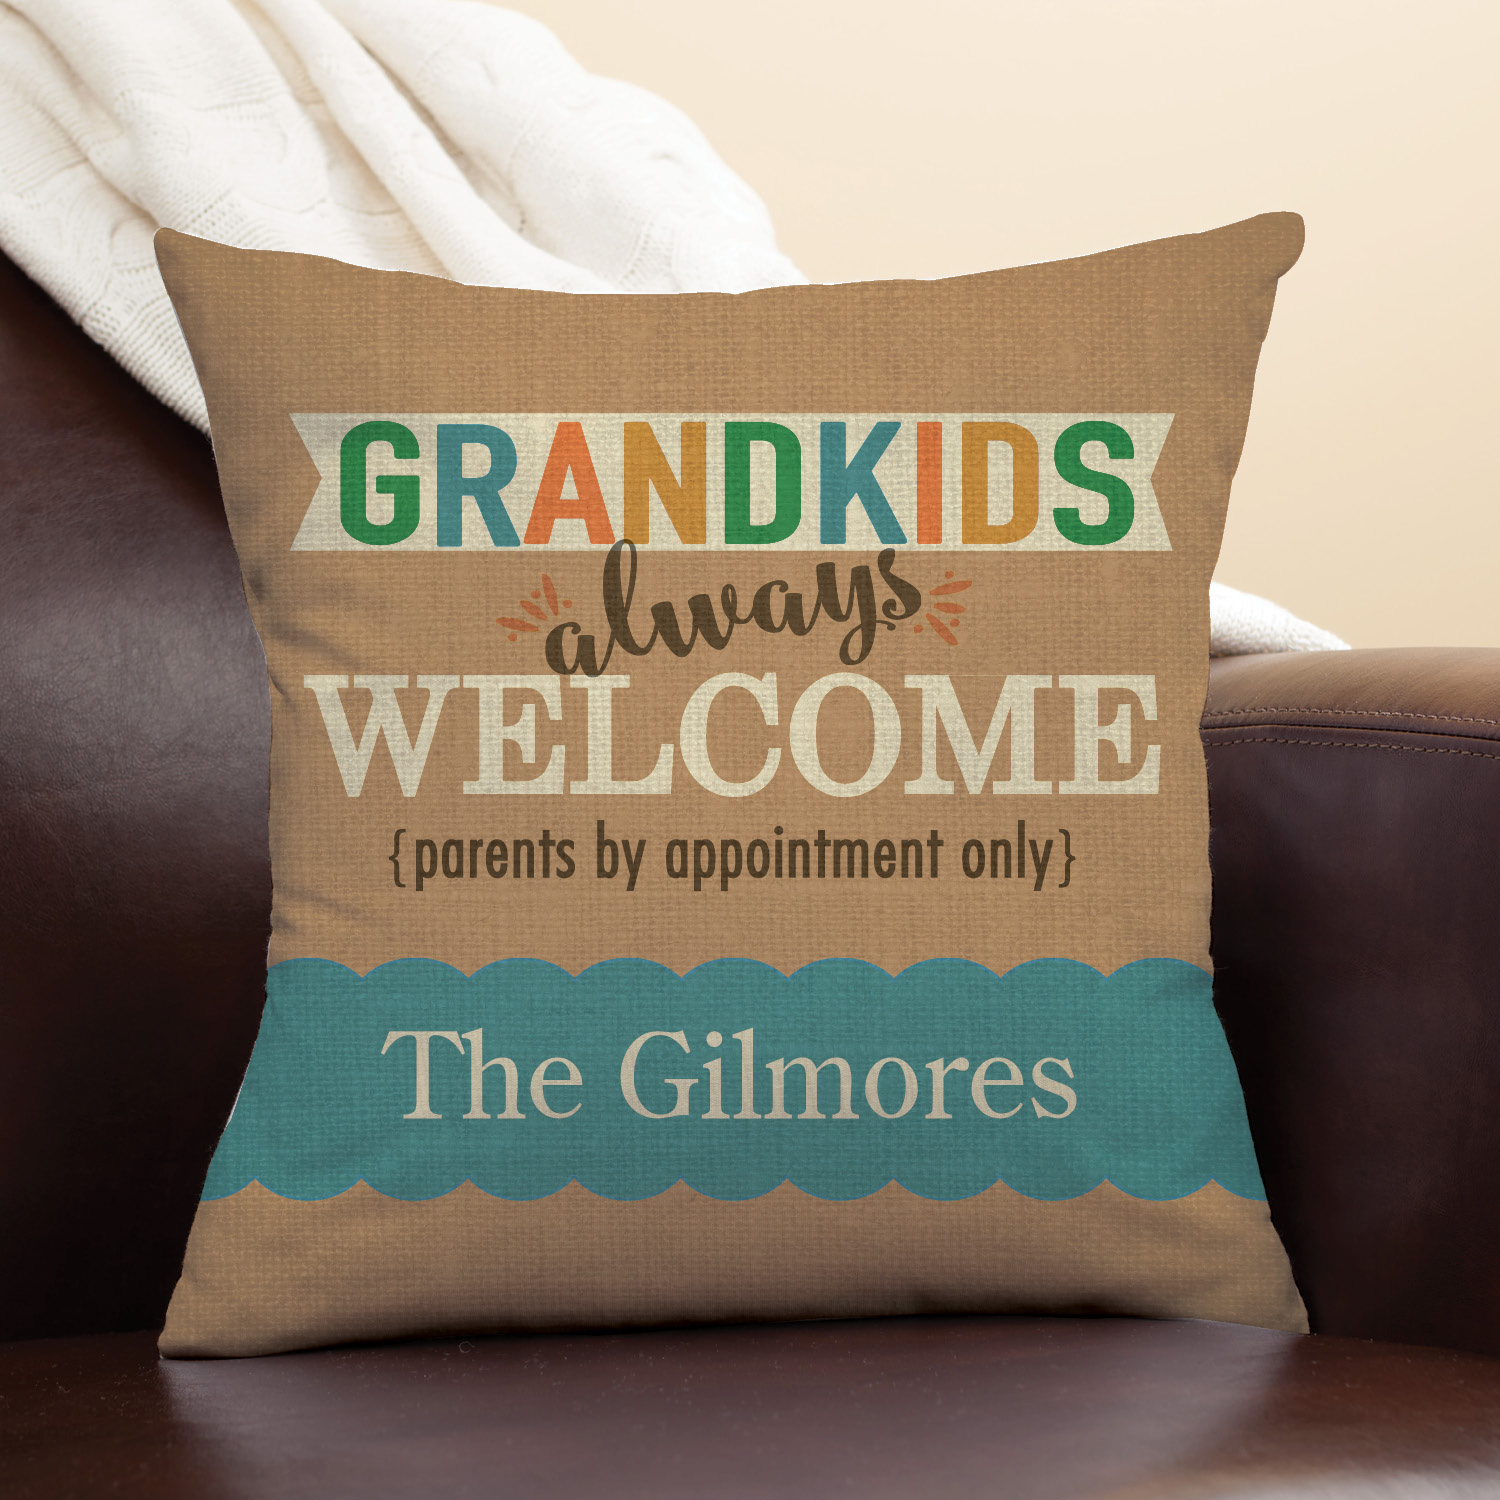 Grandkids Always Welcome Personalized Throw Pillow